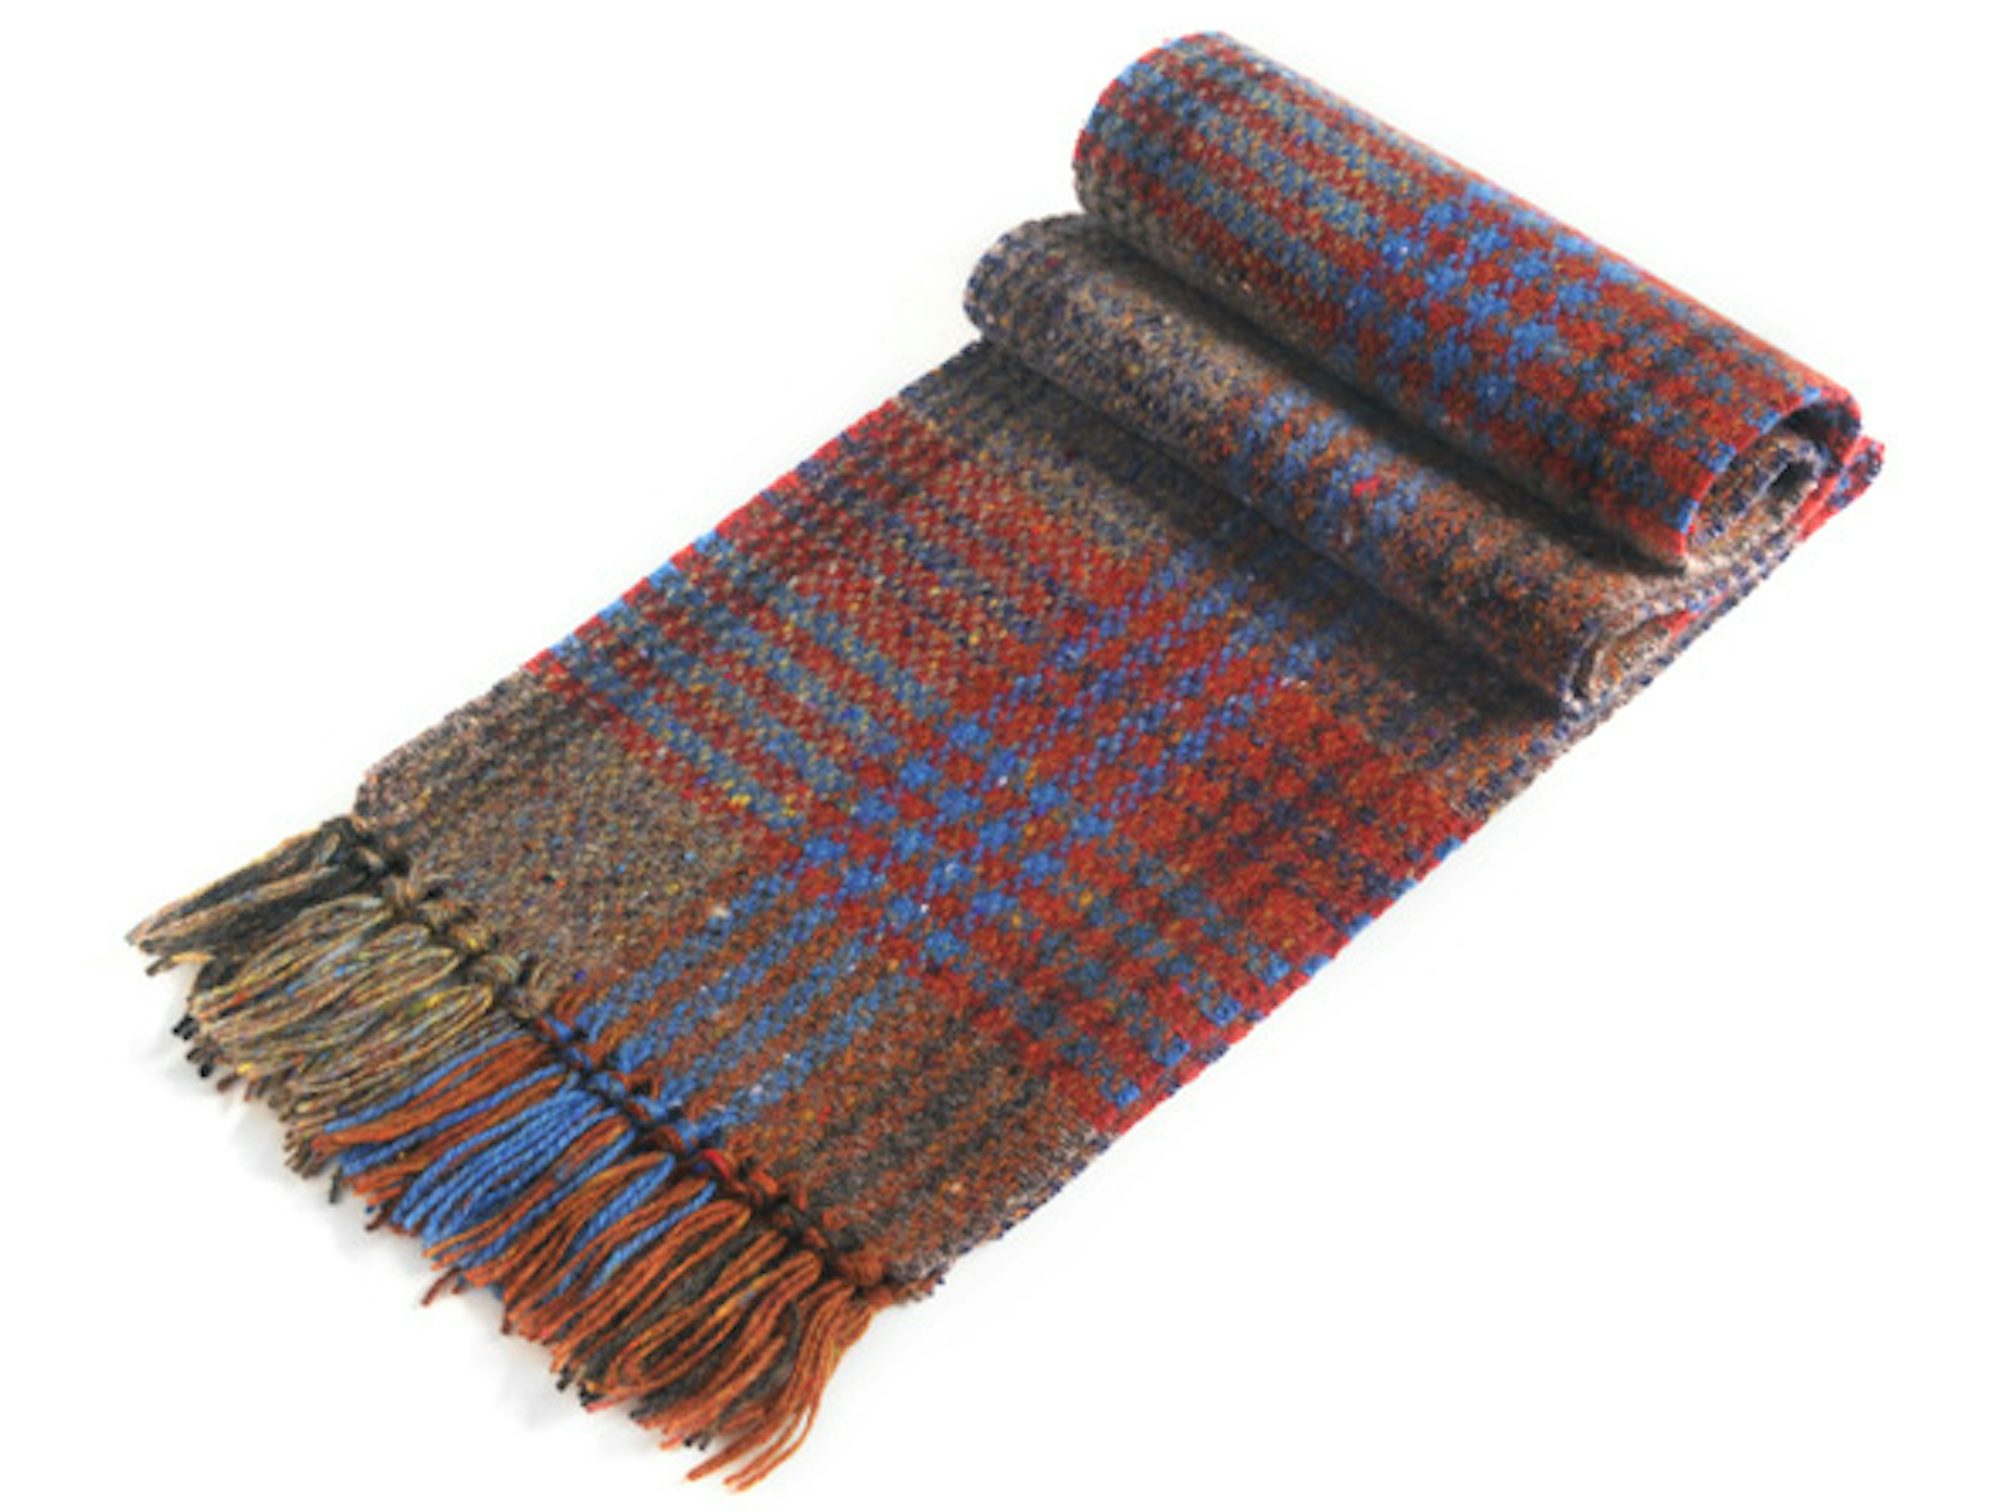 Download Buy Studio Donegal wool scarves from Irish Inspiration ...